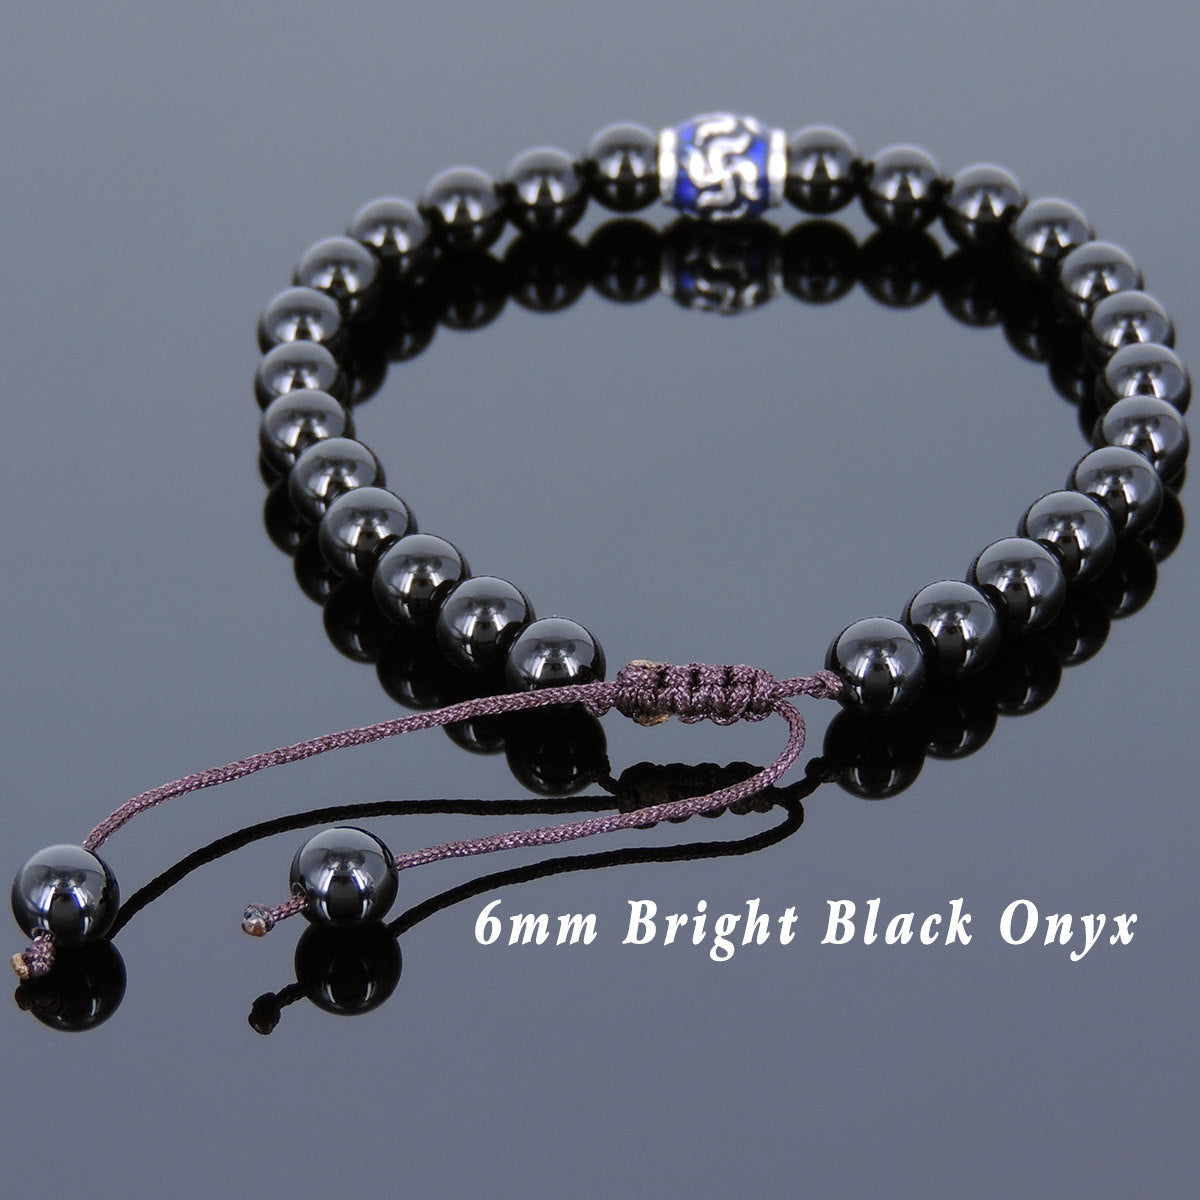 6mm Bright Black Onyx Adjustable Braided Bracelet with S925 Sterling Silver Hand-painted Buddhism Barrel Beads - Handmade by Gem & Silver BR730